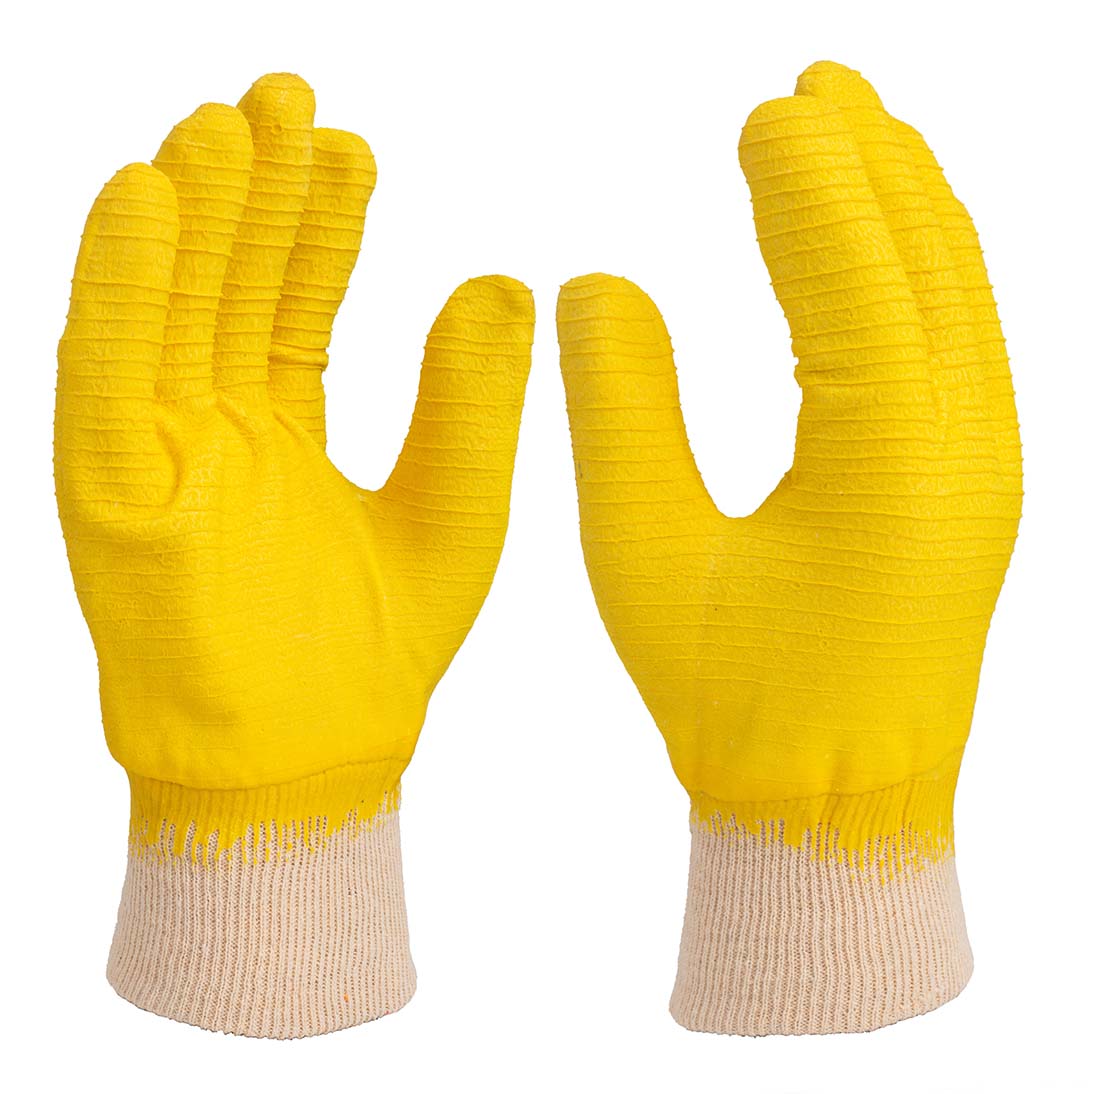 Knit wrist Jersey glove latex fully coated 